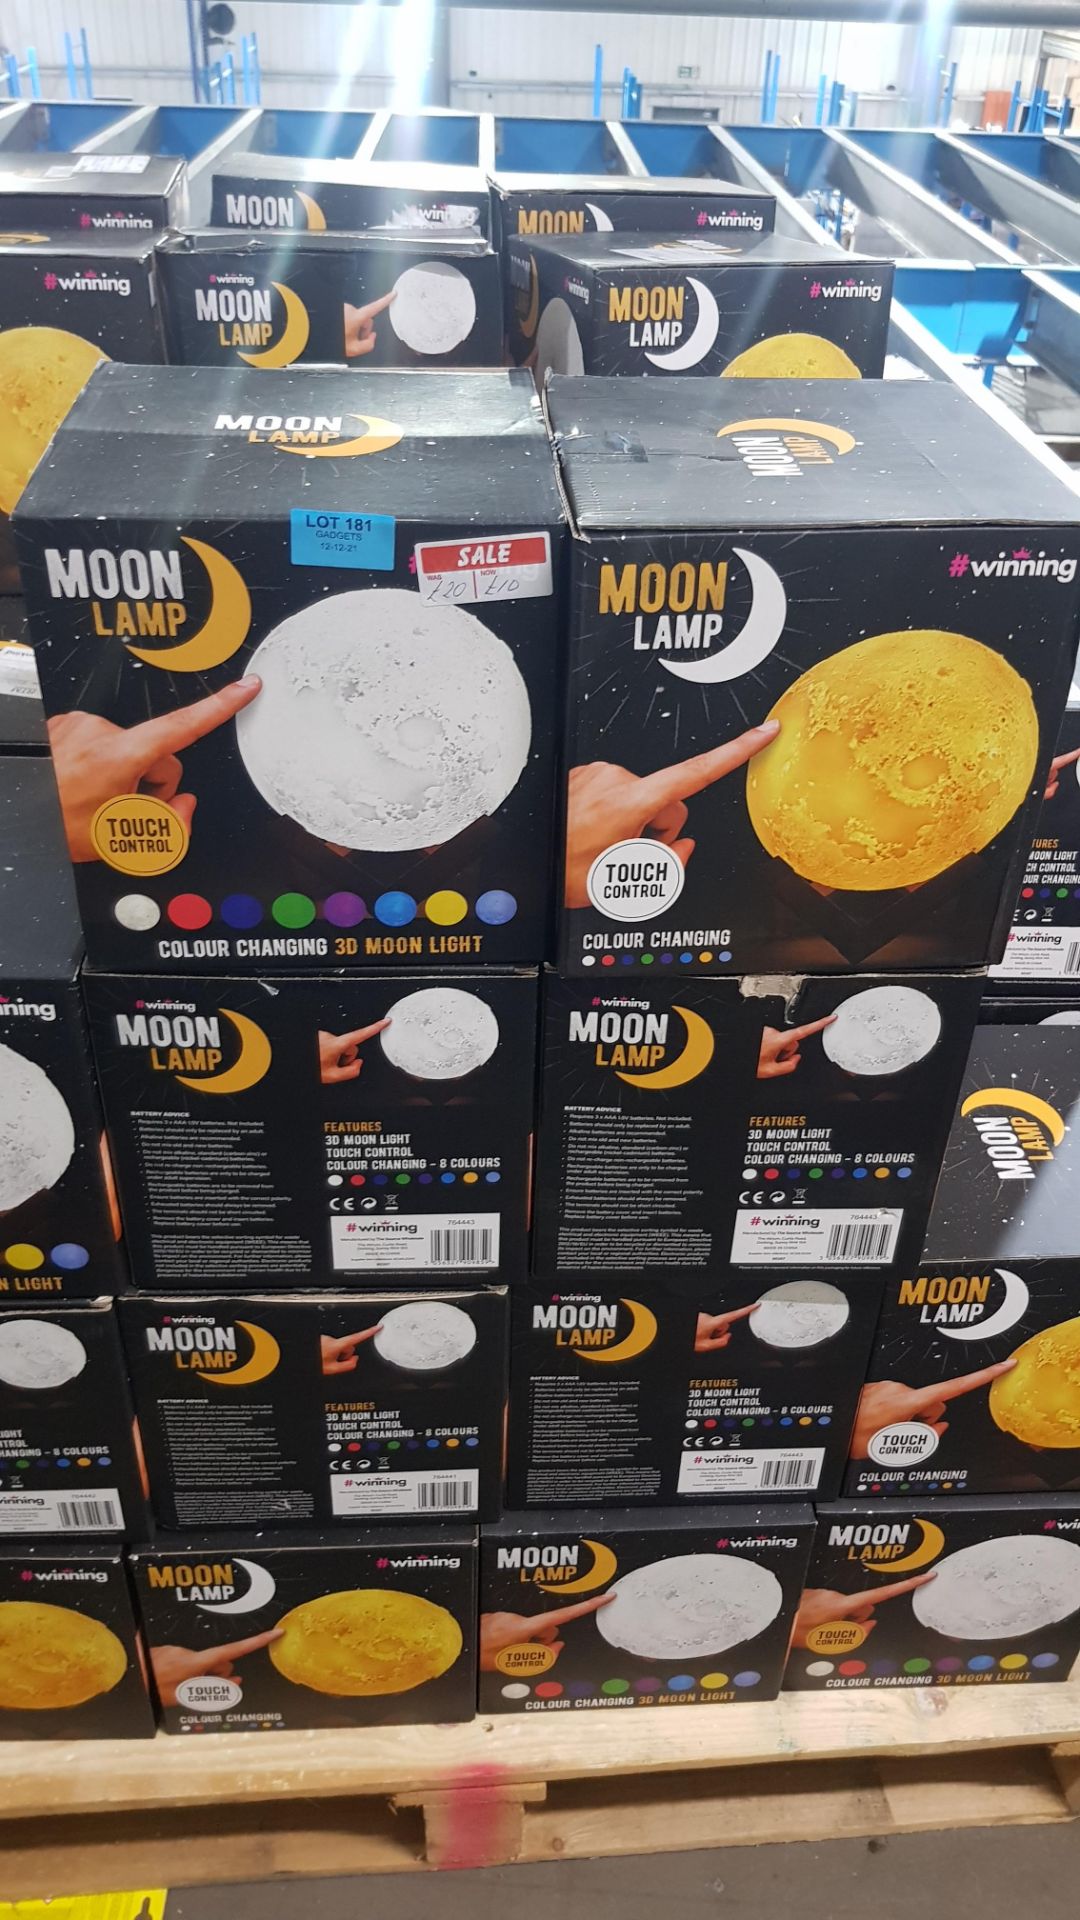 10x #Winning Colour Changing Moon Lamp RRP £19.99 Each. (Units Have Return To Manufacturer Sticker) - Image 3 of 3